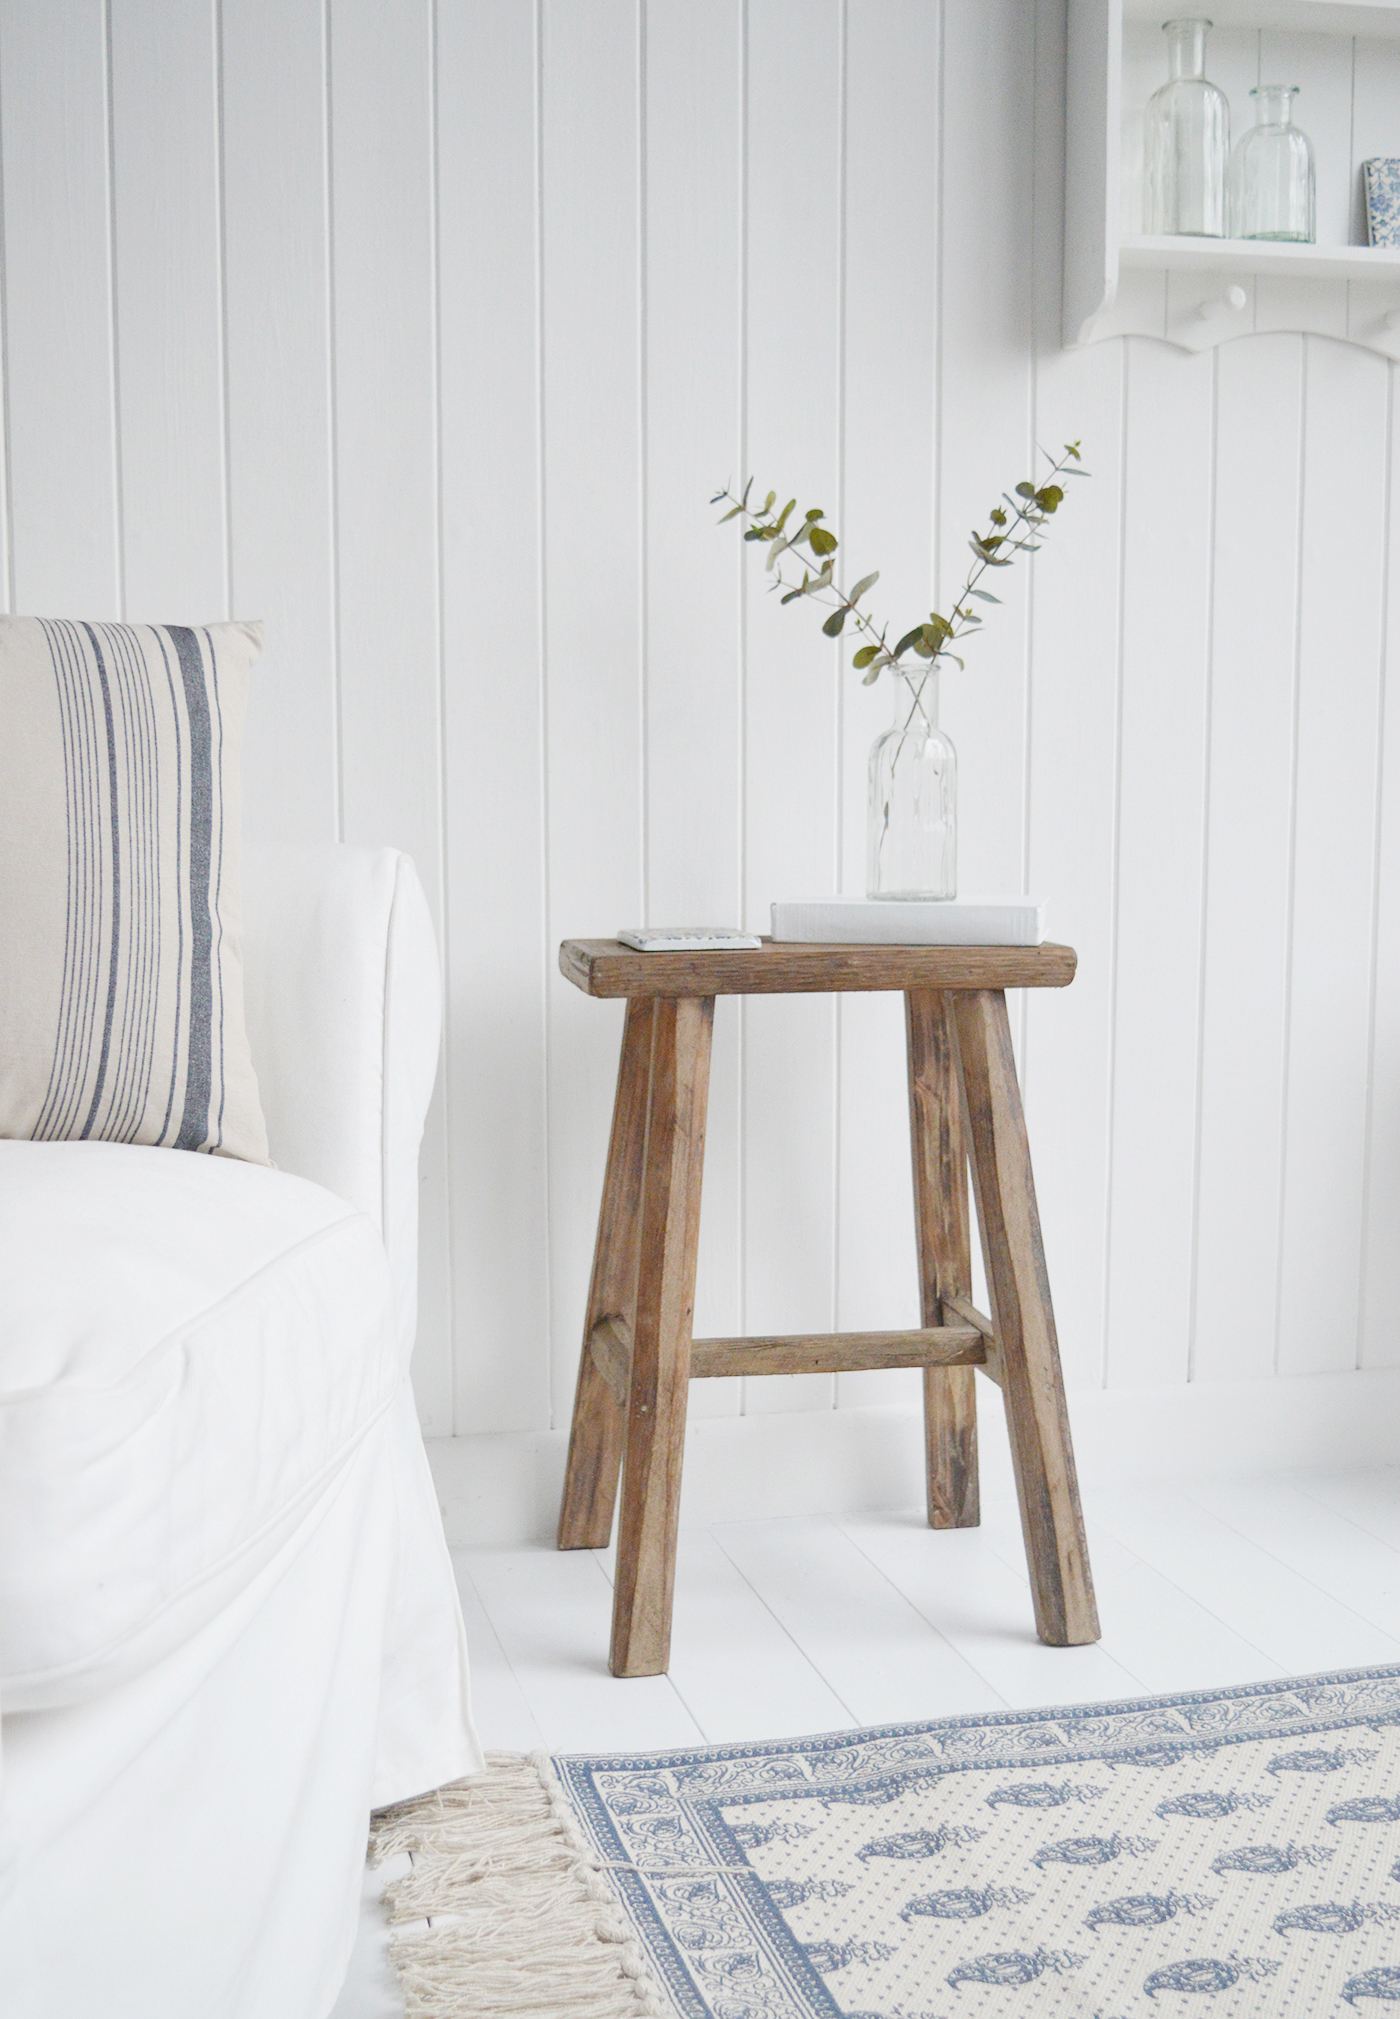 Georgetown rustic wooden stool for coastal and country furniture from The White Lighthouse. New England coastal, country, farmhouse and city home furniture and interiors for Bathroom, Living Room, Bedroom and Hallway Furniture for beautiful homes